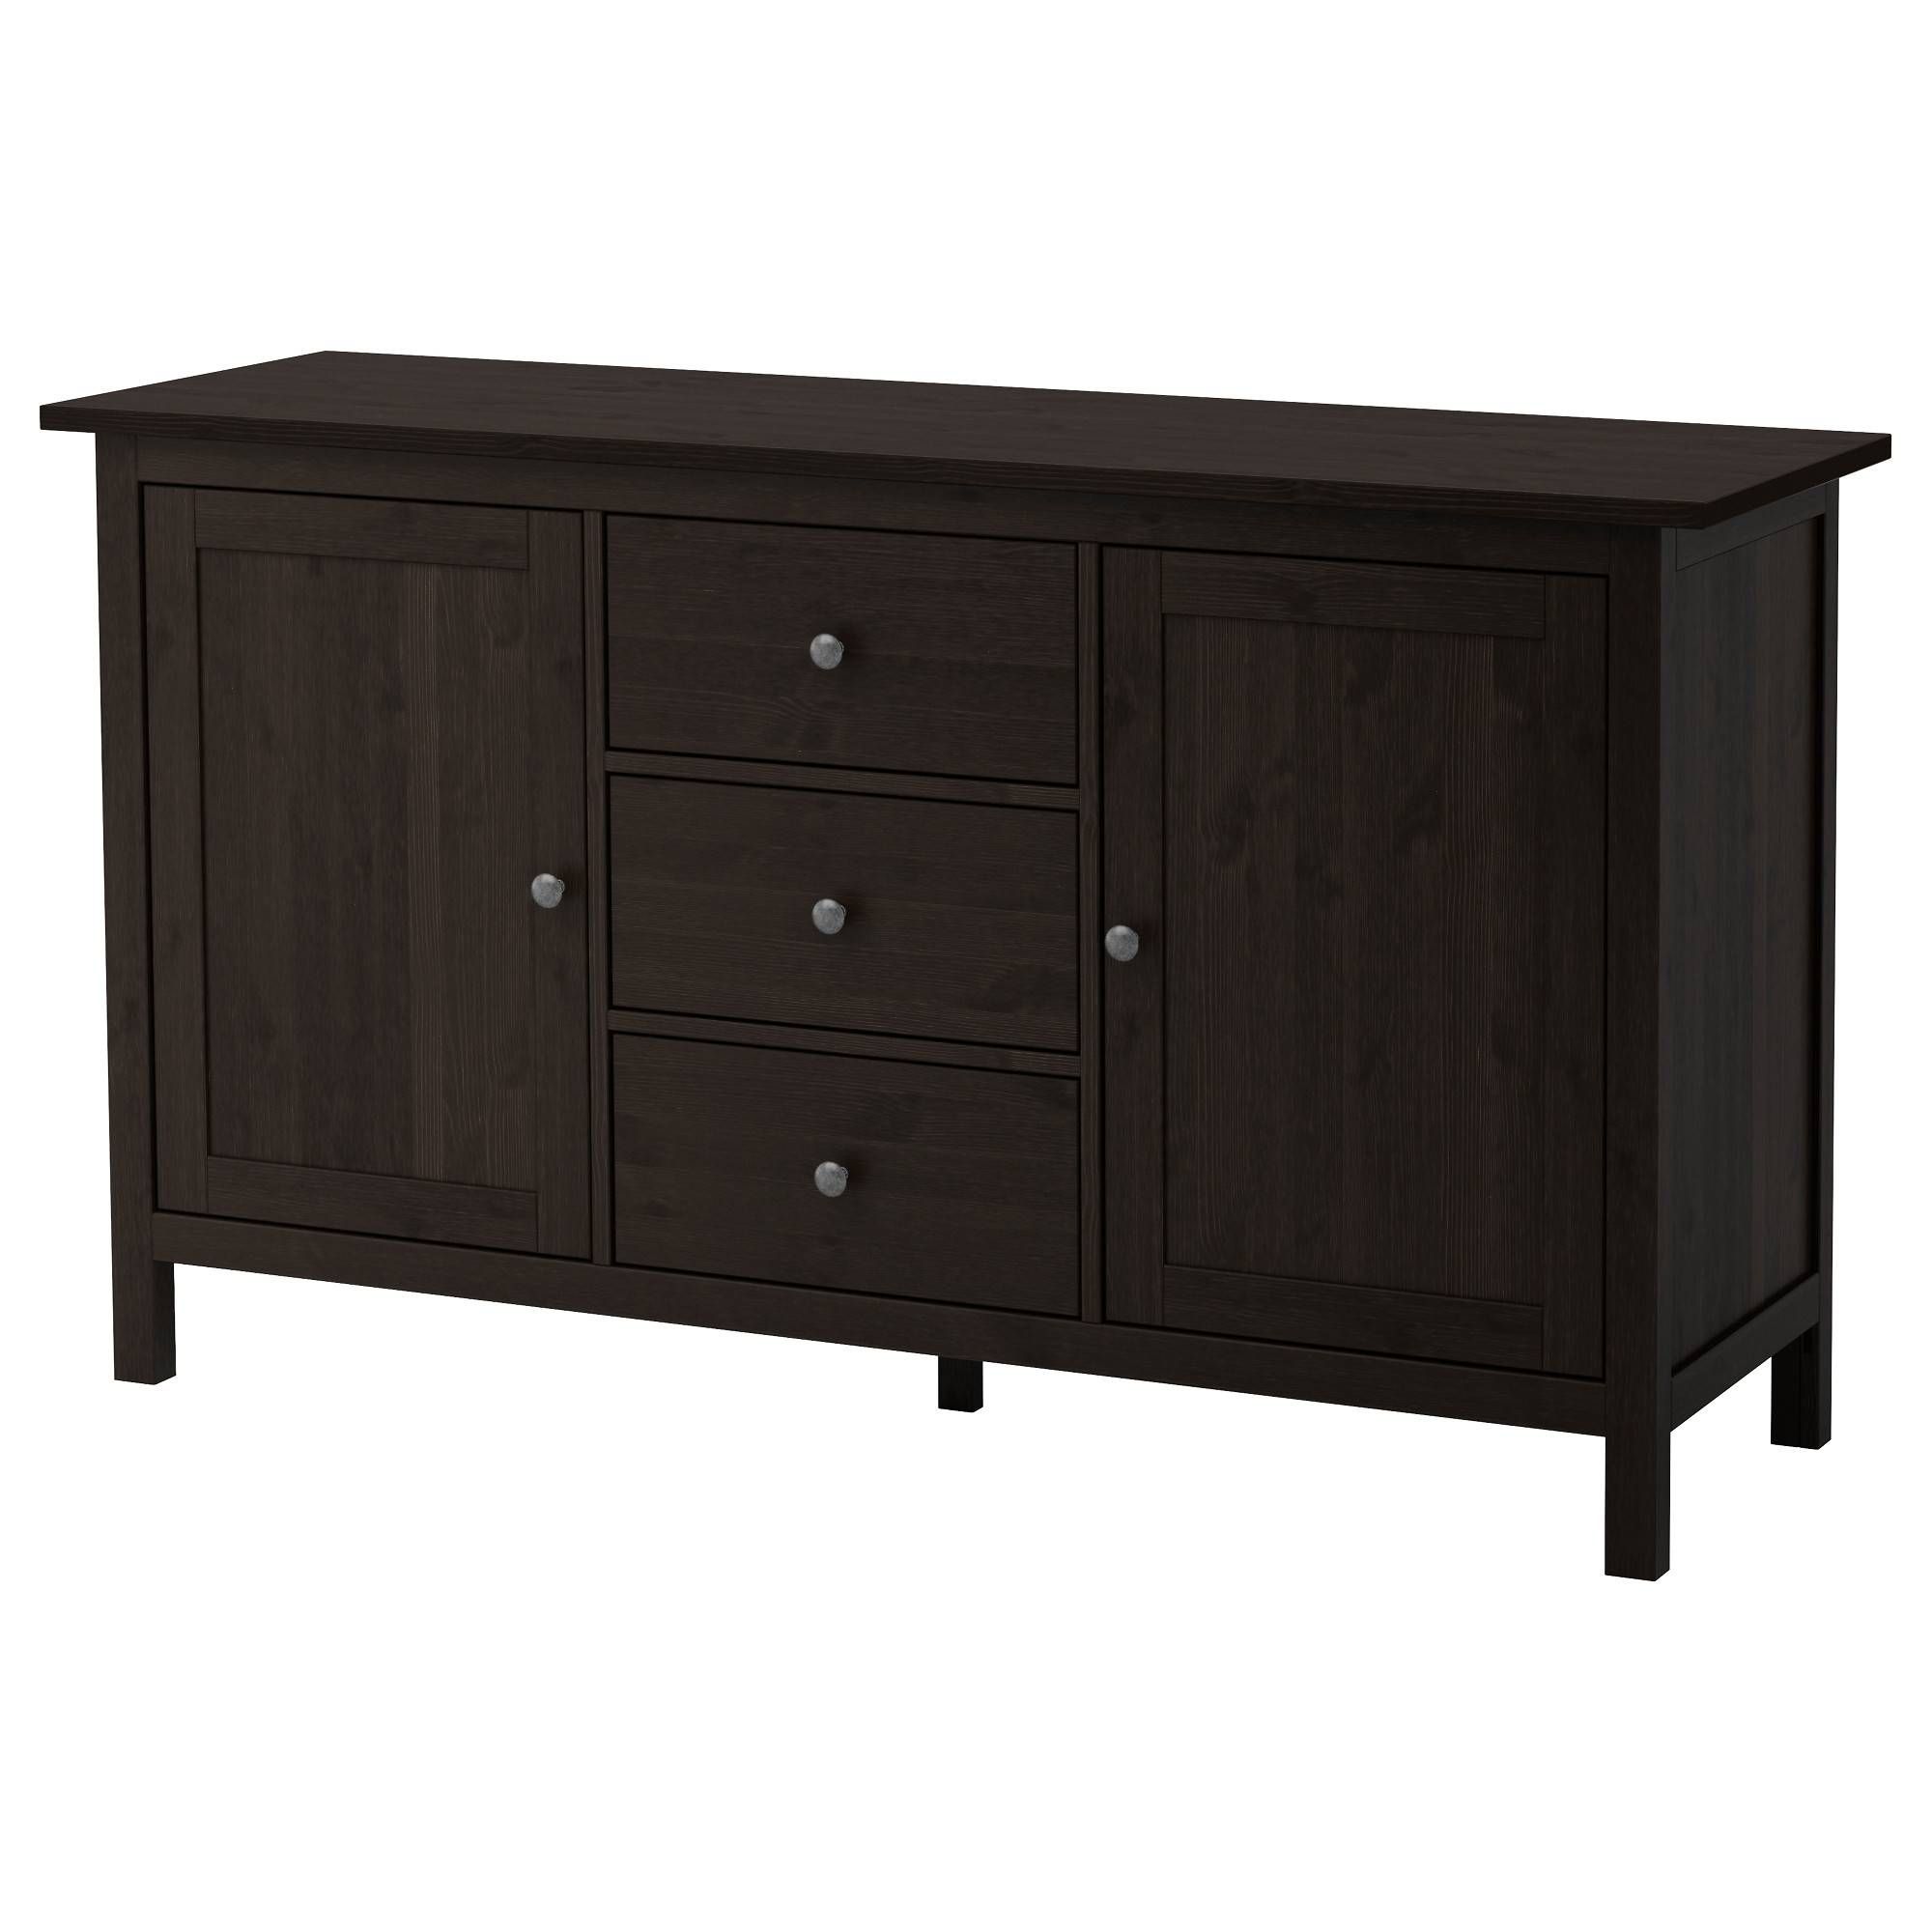 Dining Room Sideboards & Buffet Cabinets – Ikea Intended For Buffet Sideboards (View 7 of 15)